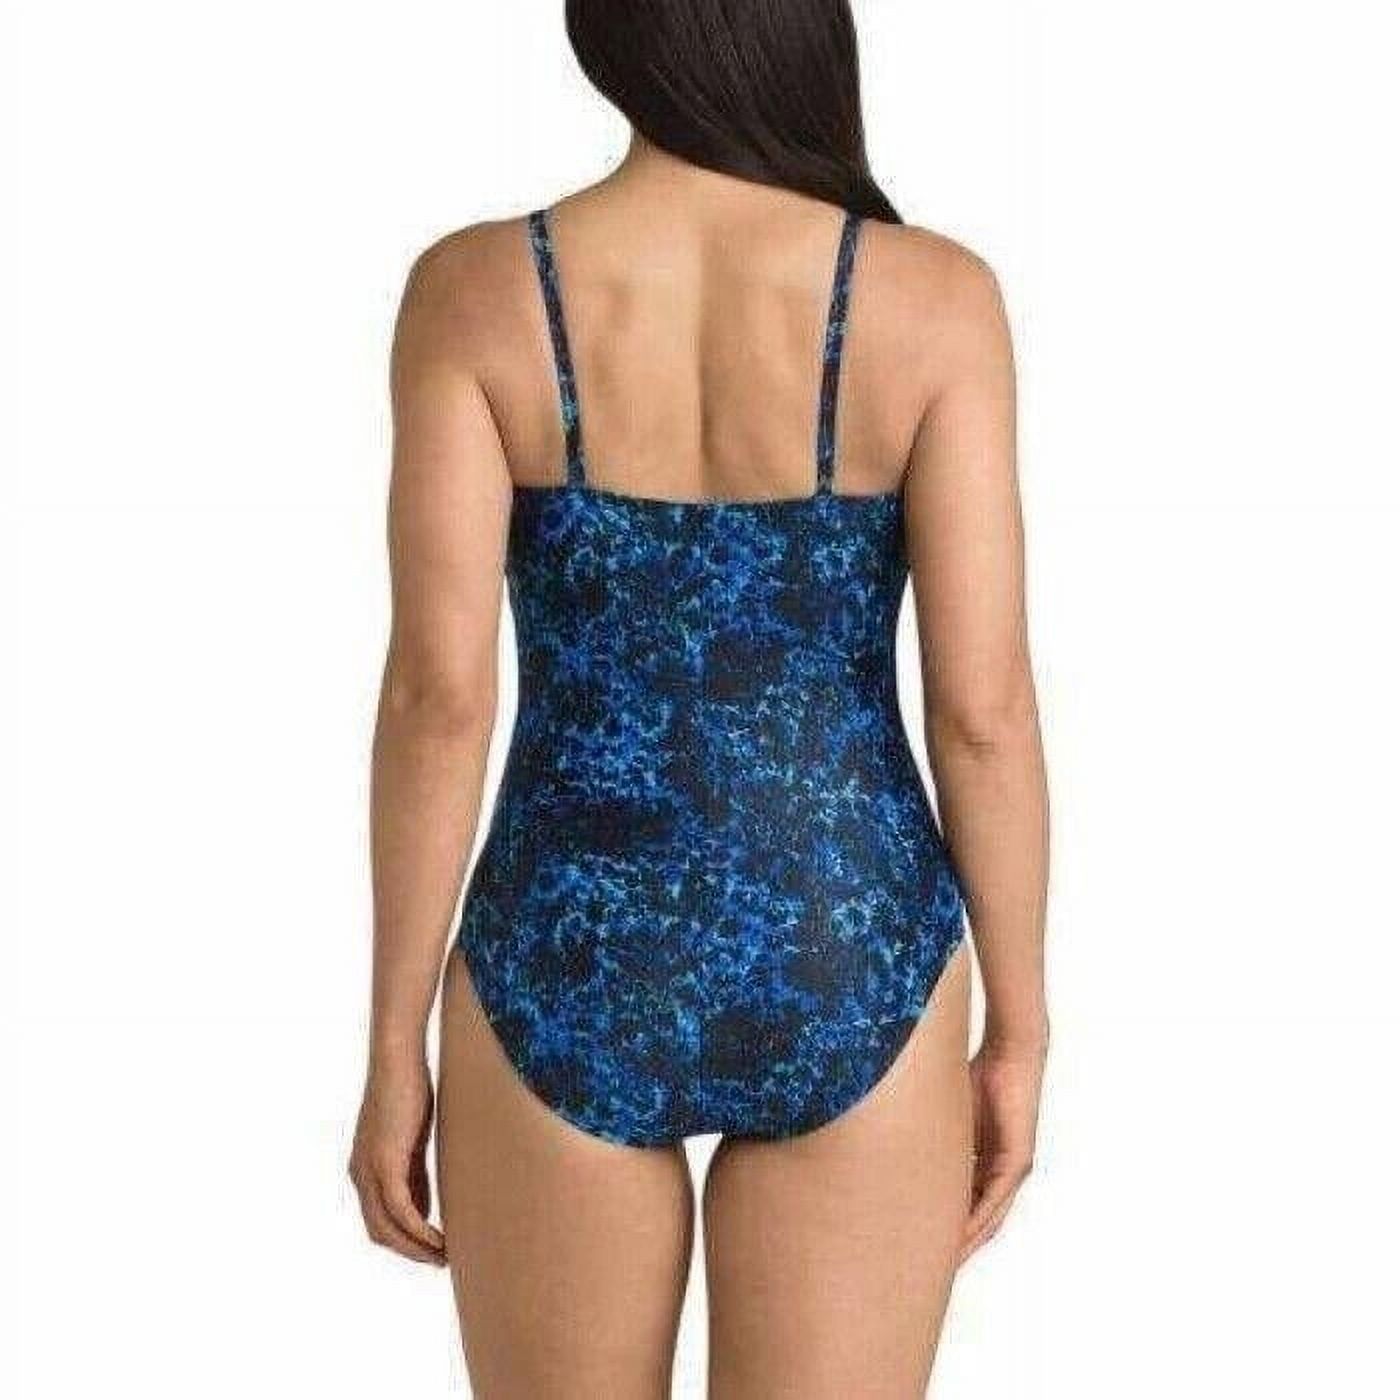 Speedo Women's One-Piece Swimsuit, BLUE TEXTURE, 6 New with box/tags - image 1 of 4